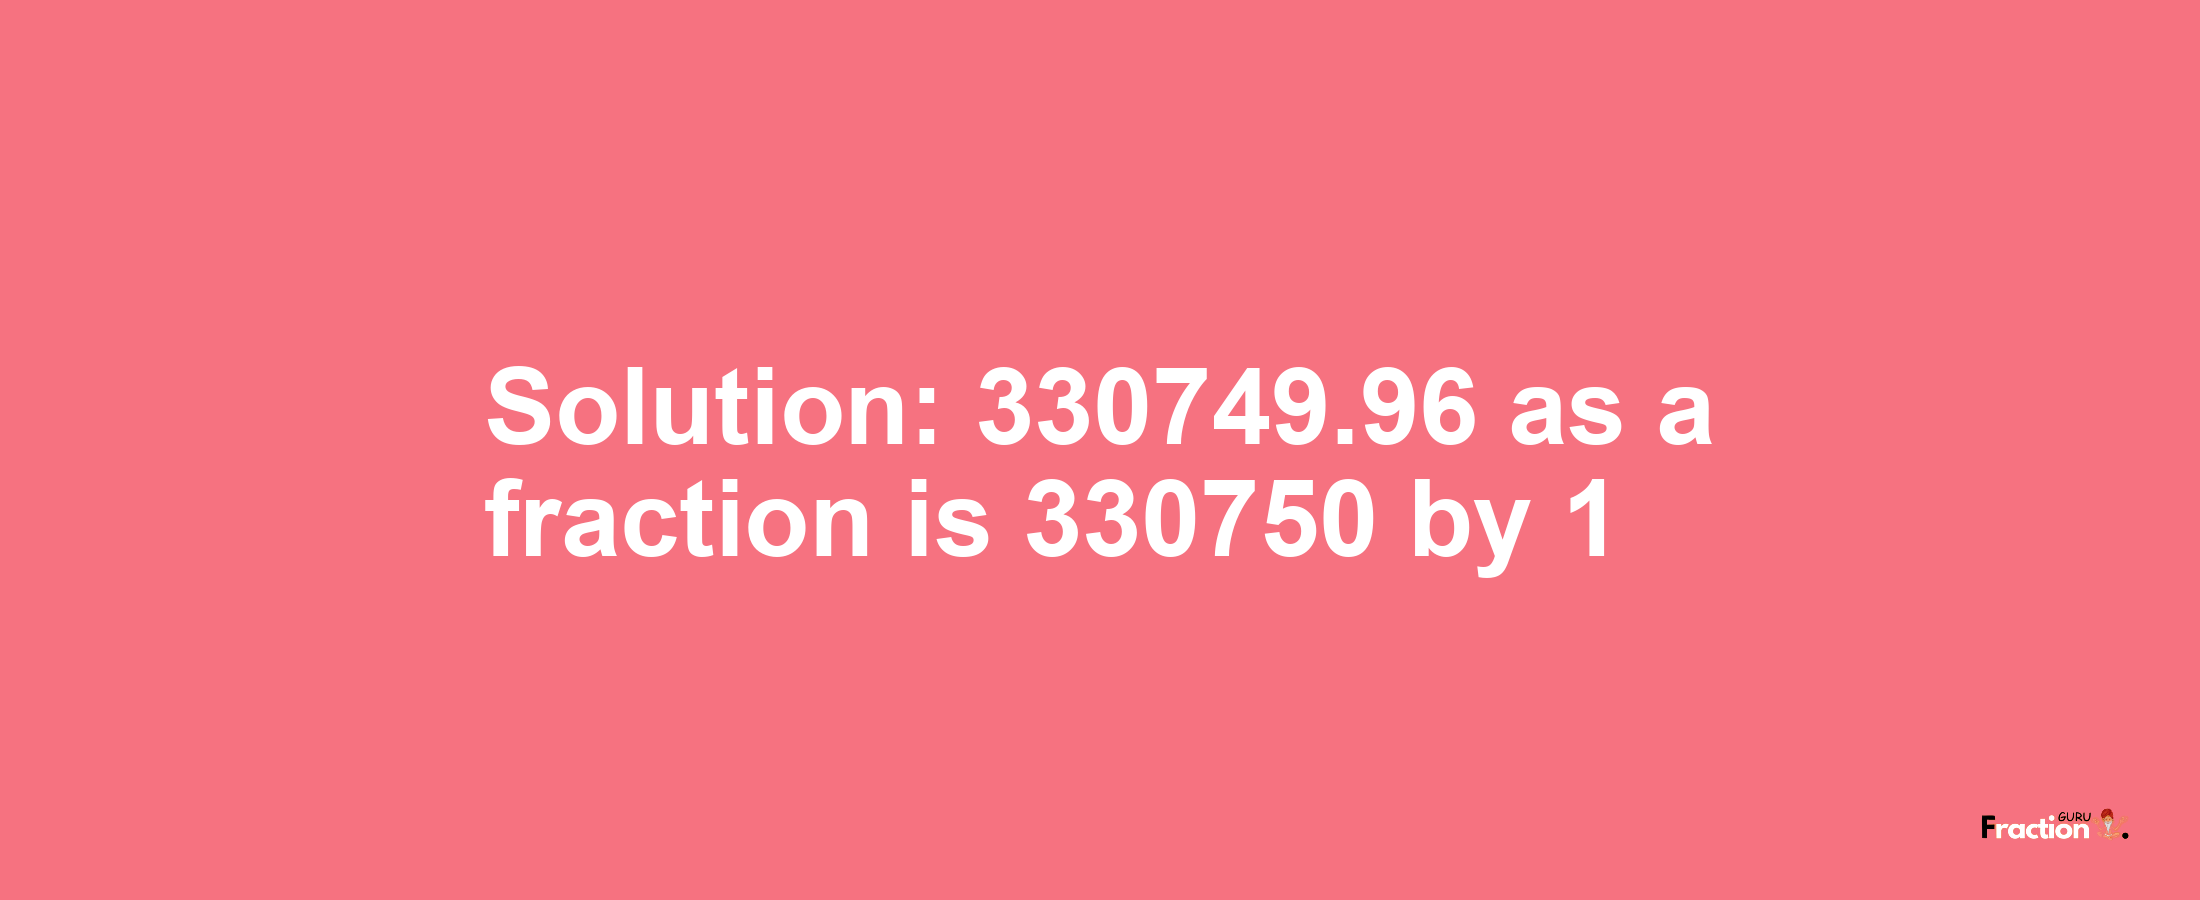 Solution:330749.96 as a fraction is 330750/1